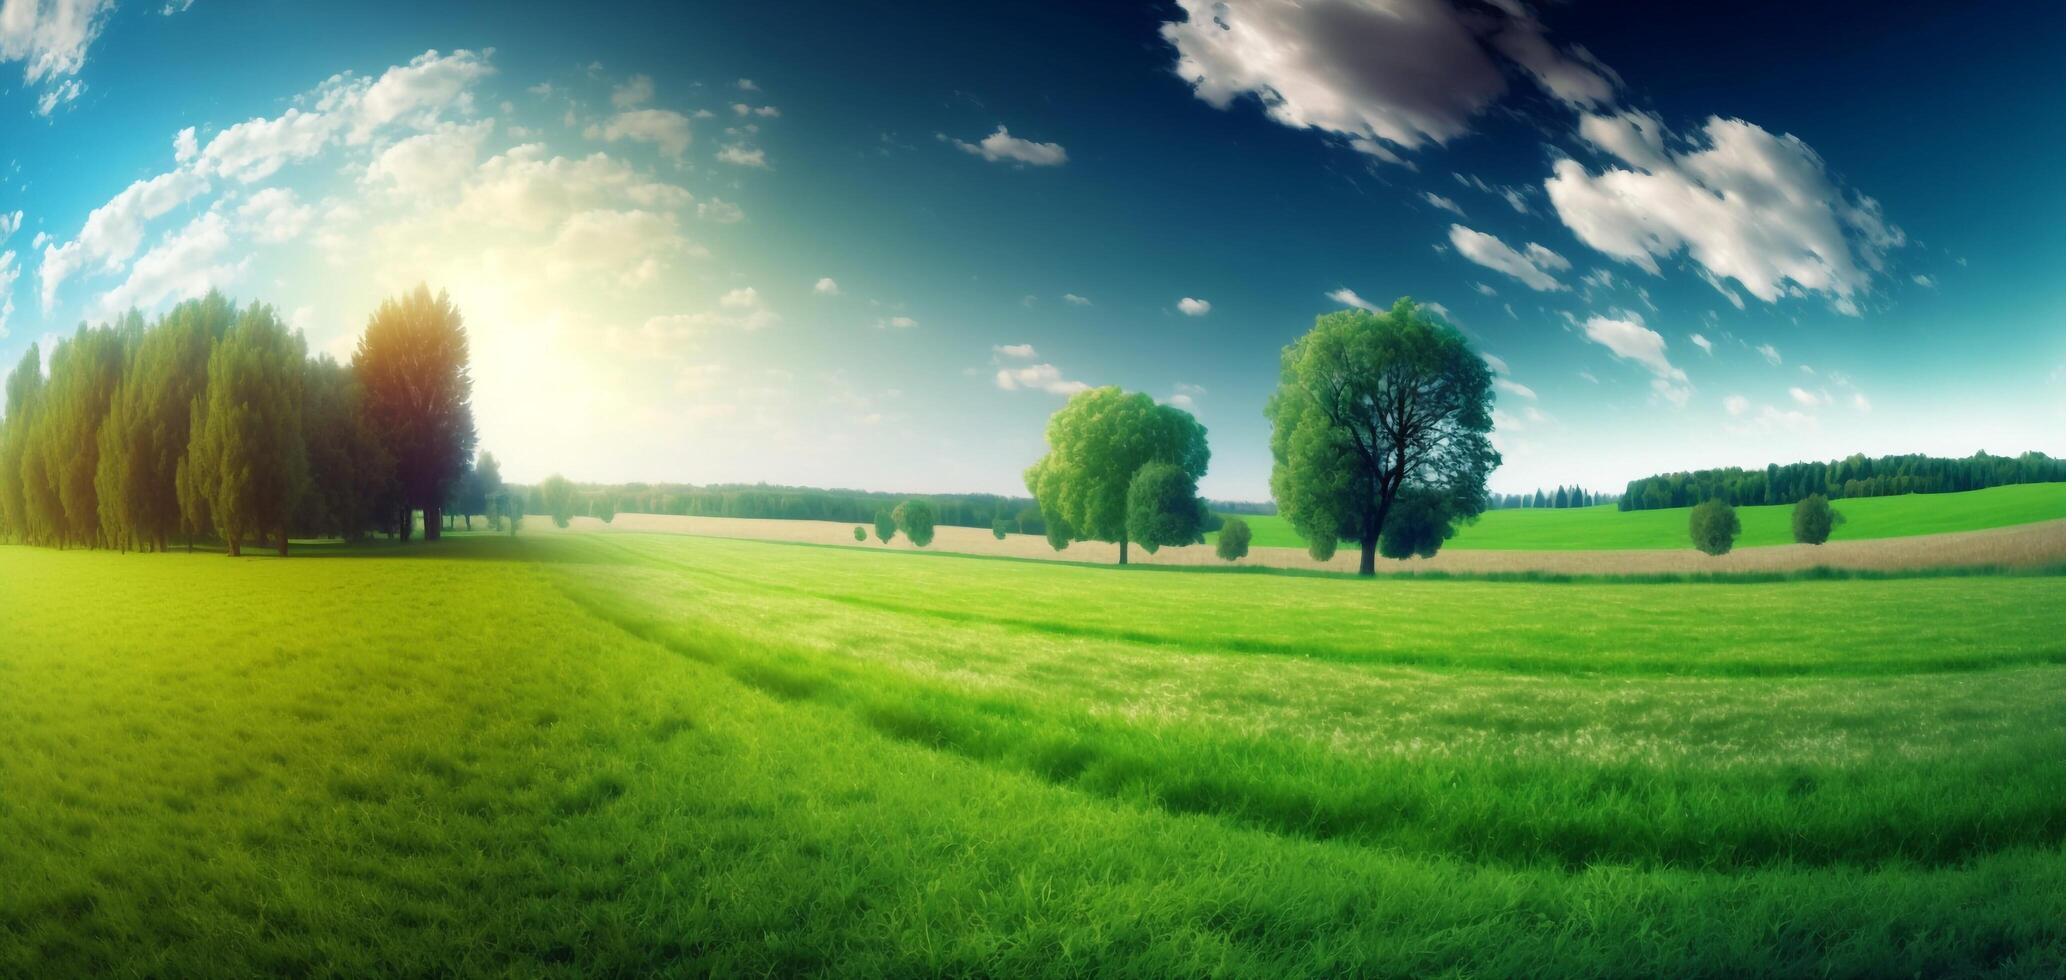 The landscape of natural grass field and trees with . photo